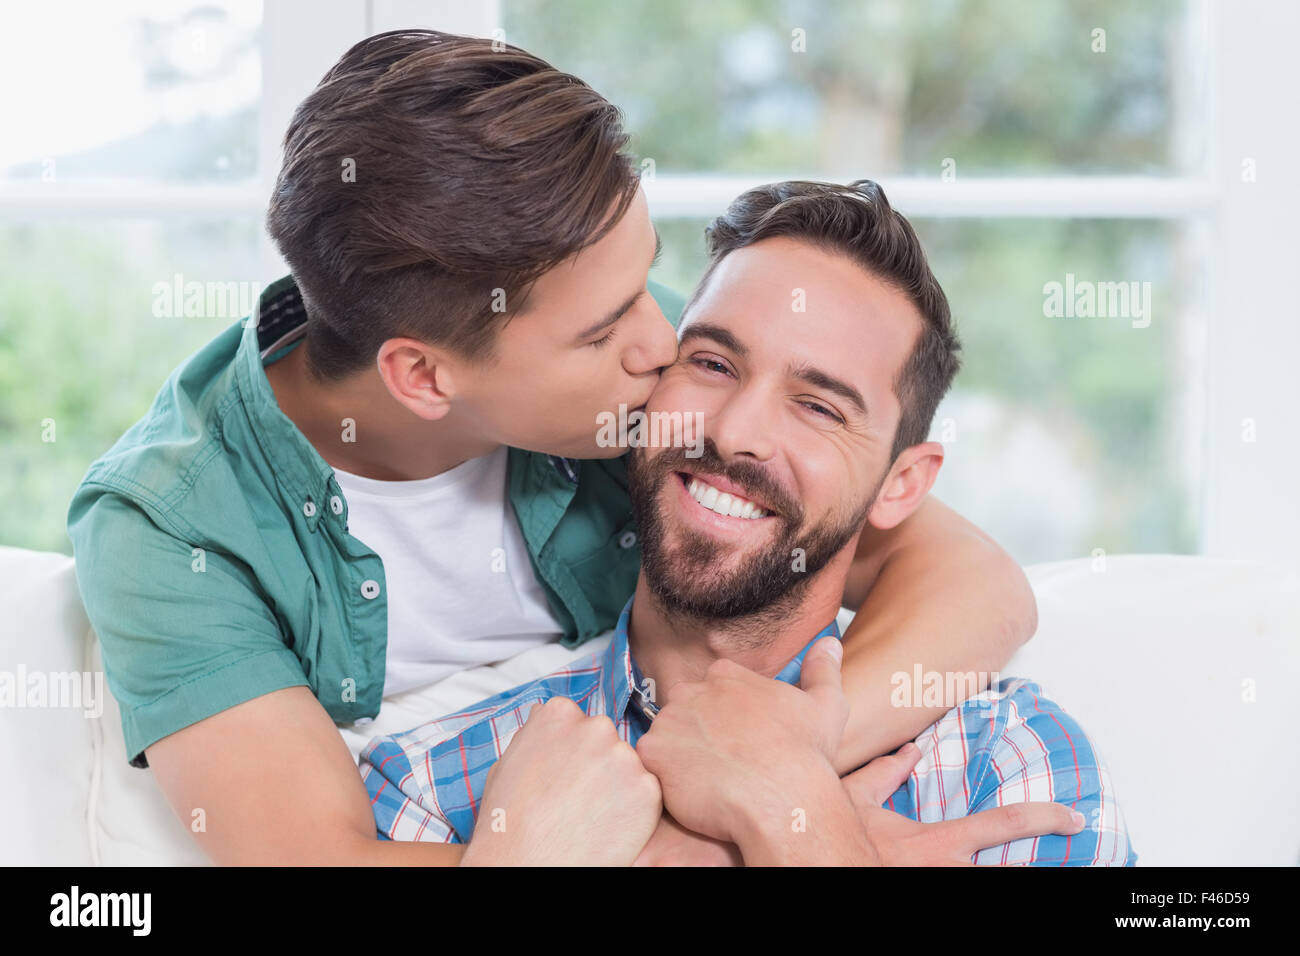 Smiling homosexual couple men kissing each other Stock Photo